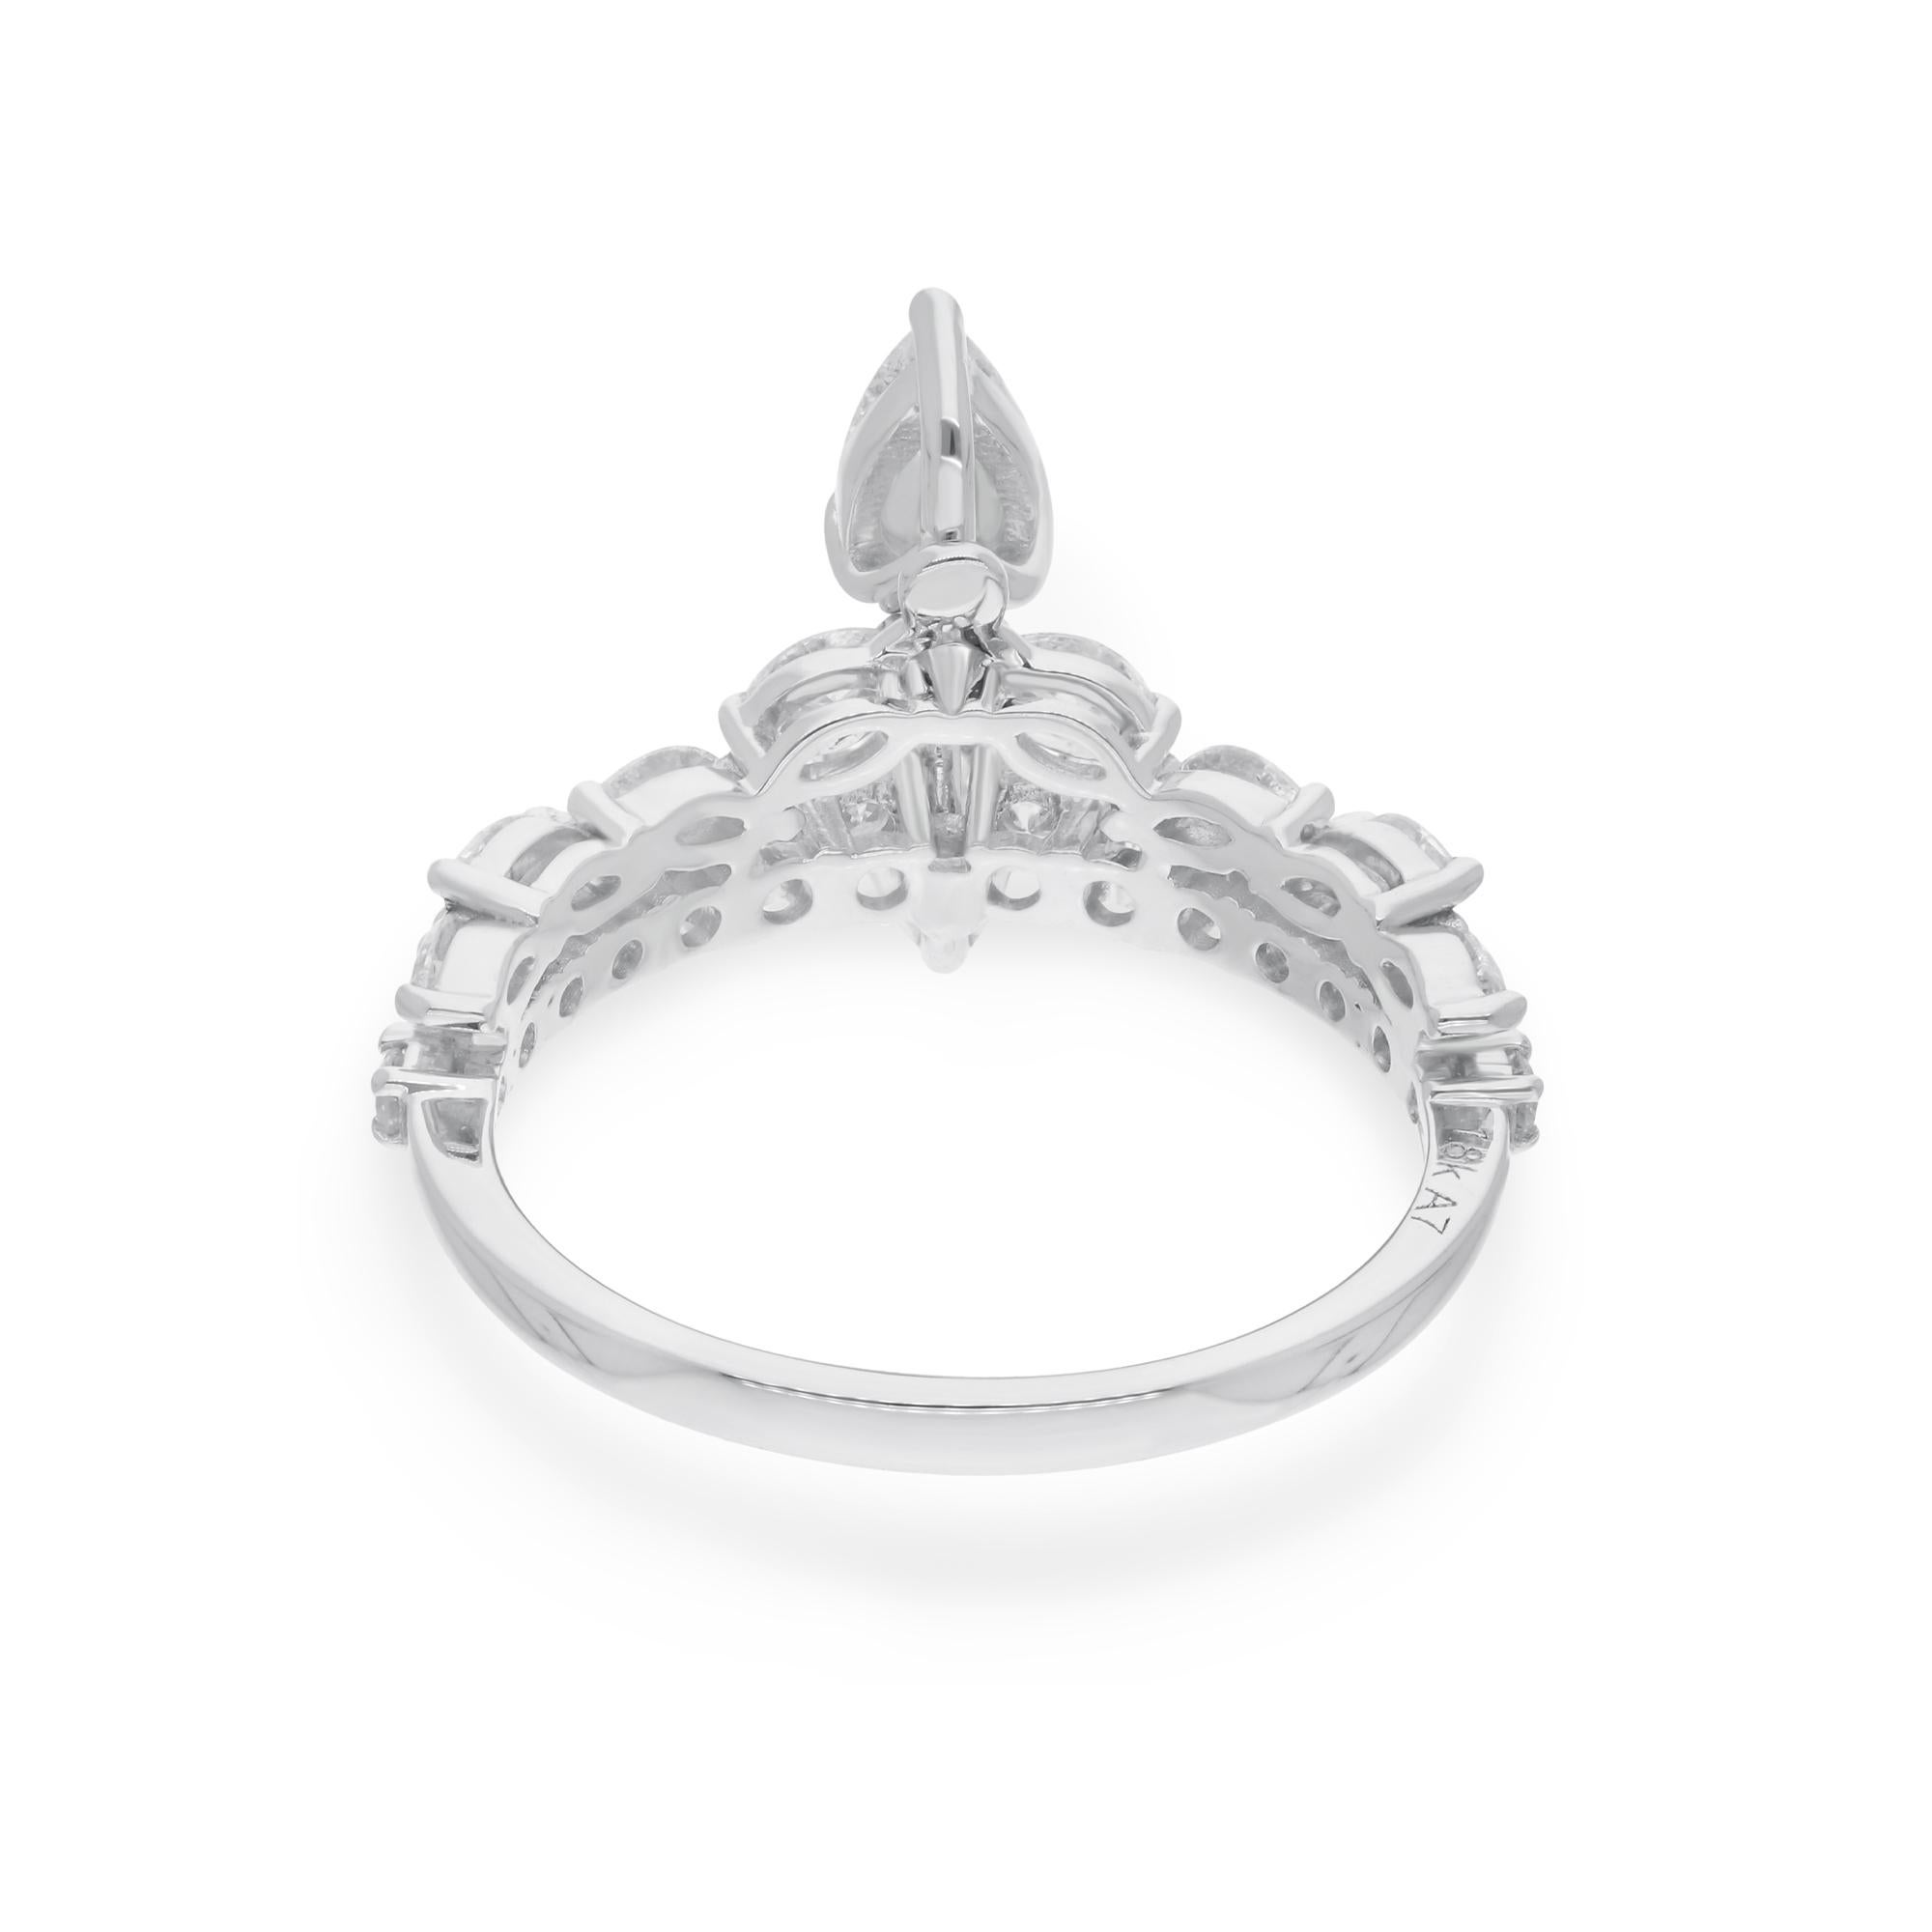 Celebrate the everlasting bond of love with this breathtaking Pear Marquise & Round Diamond Wedding Ring, a masterpiece of artisanal craftsmanship meticulously handmade in luxurious 18 karat white gold. Designed to symbolize the eternal commitment